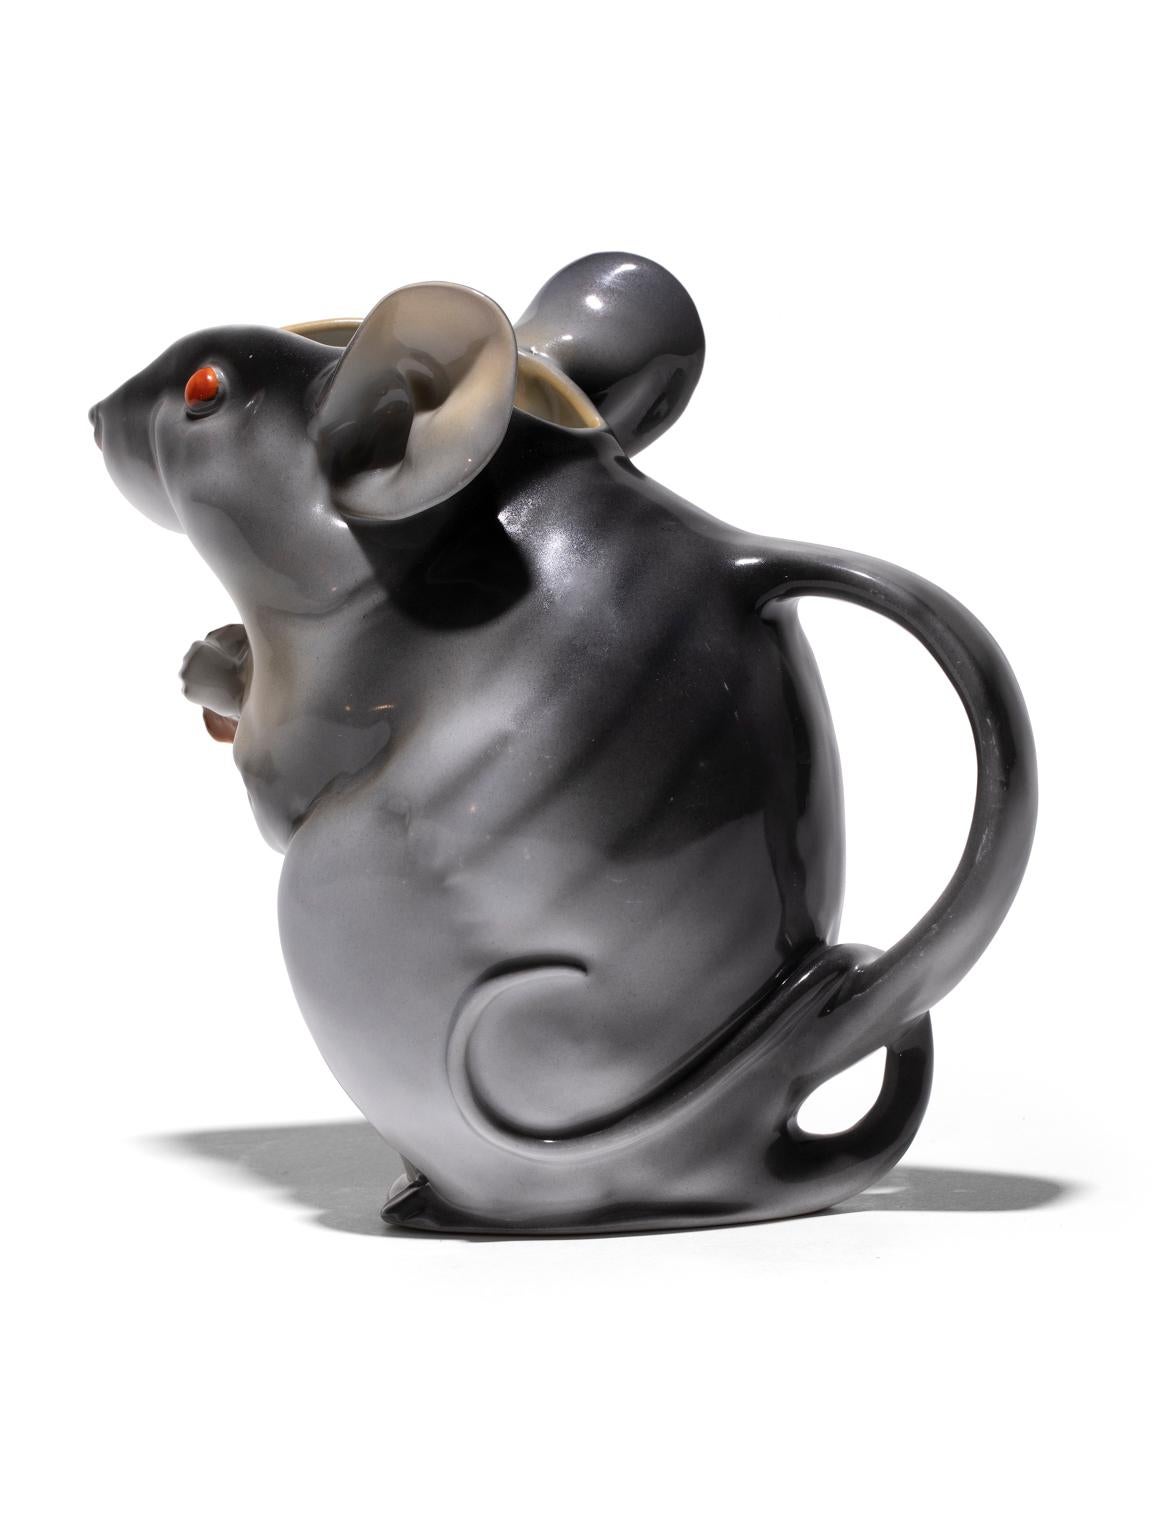 Royal Bayreuth Mouse Pitcher is glazed in soft grays with sparkling red eyes. This piece is extremely rare. The size being 8.5 inches high when normally this mouse is 6 inches. The bottom is marked: 